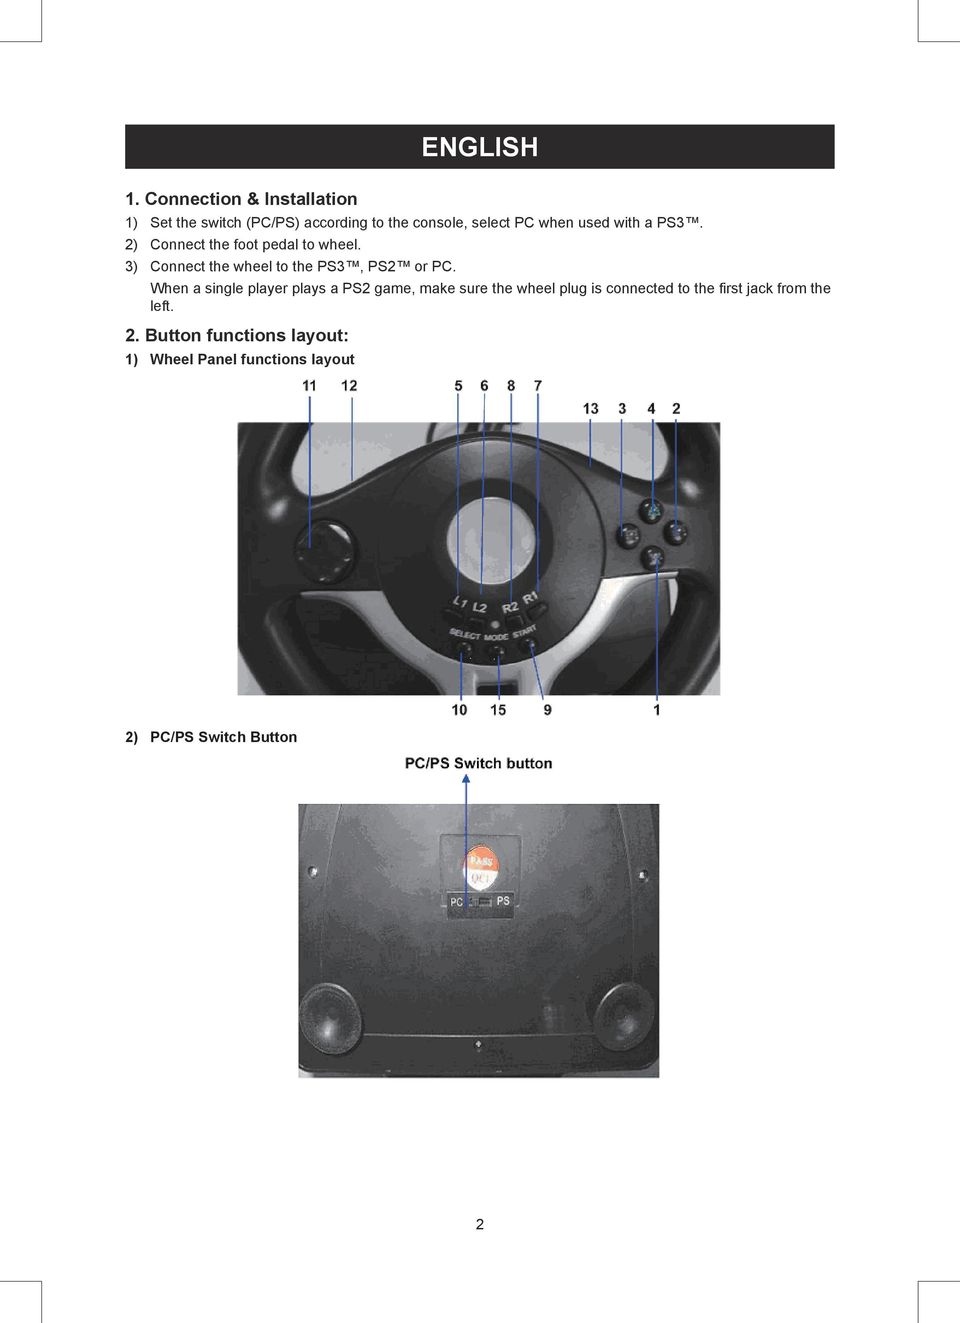 with a PS3. 2) Connect the foot pedal to wheel. 3) Connect the wheel to the PS3, PS2 or PC.